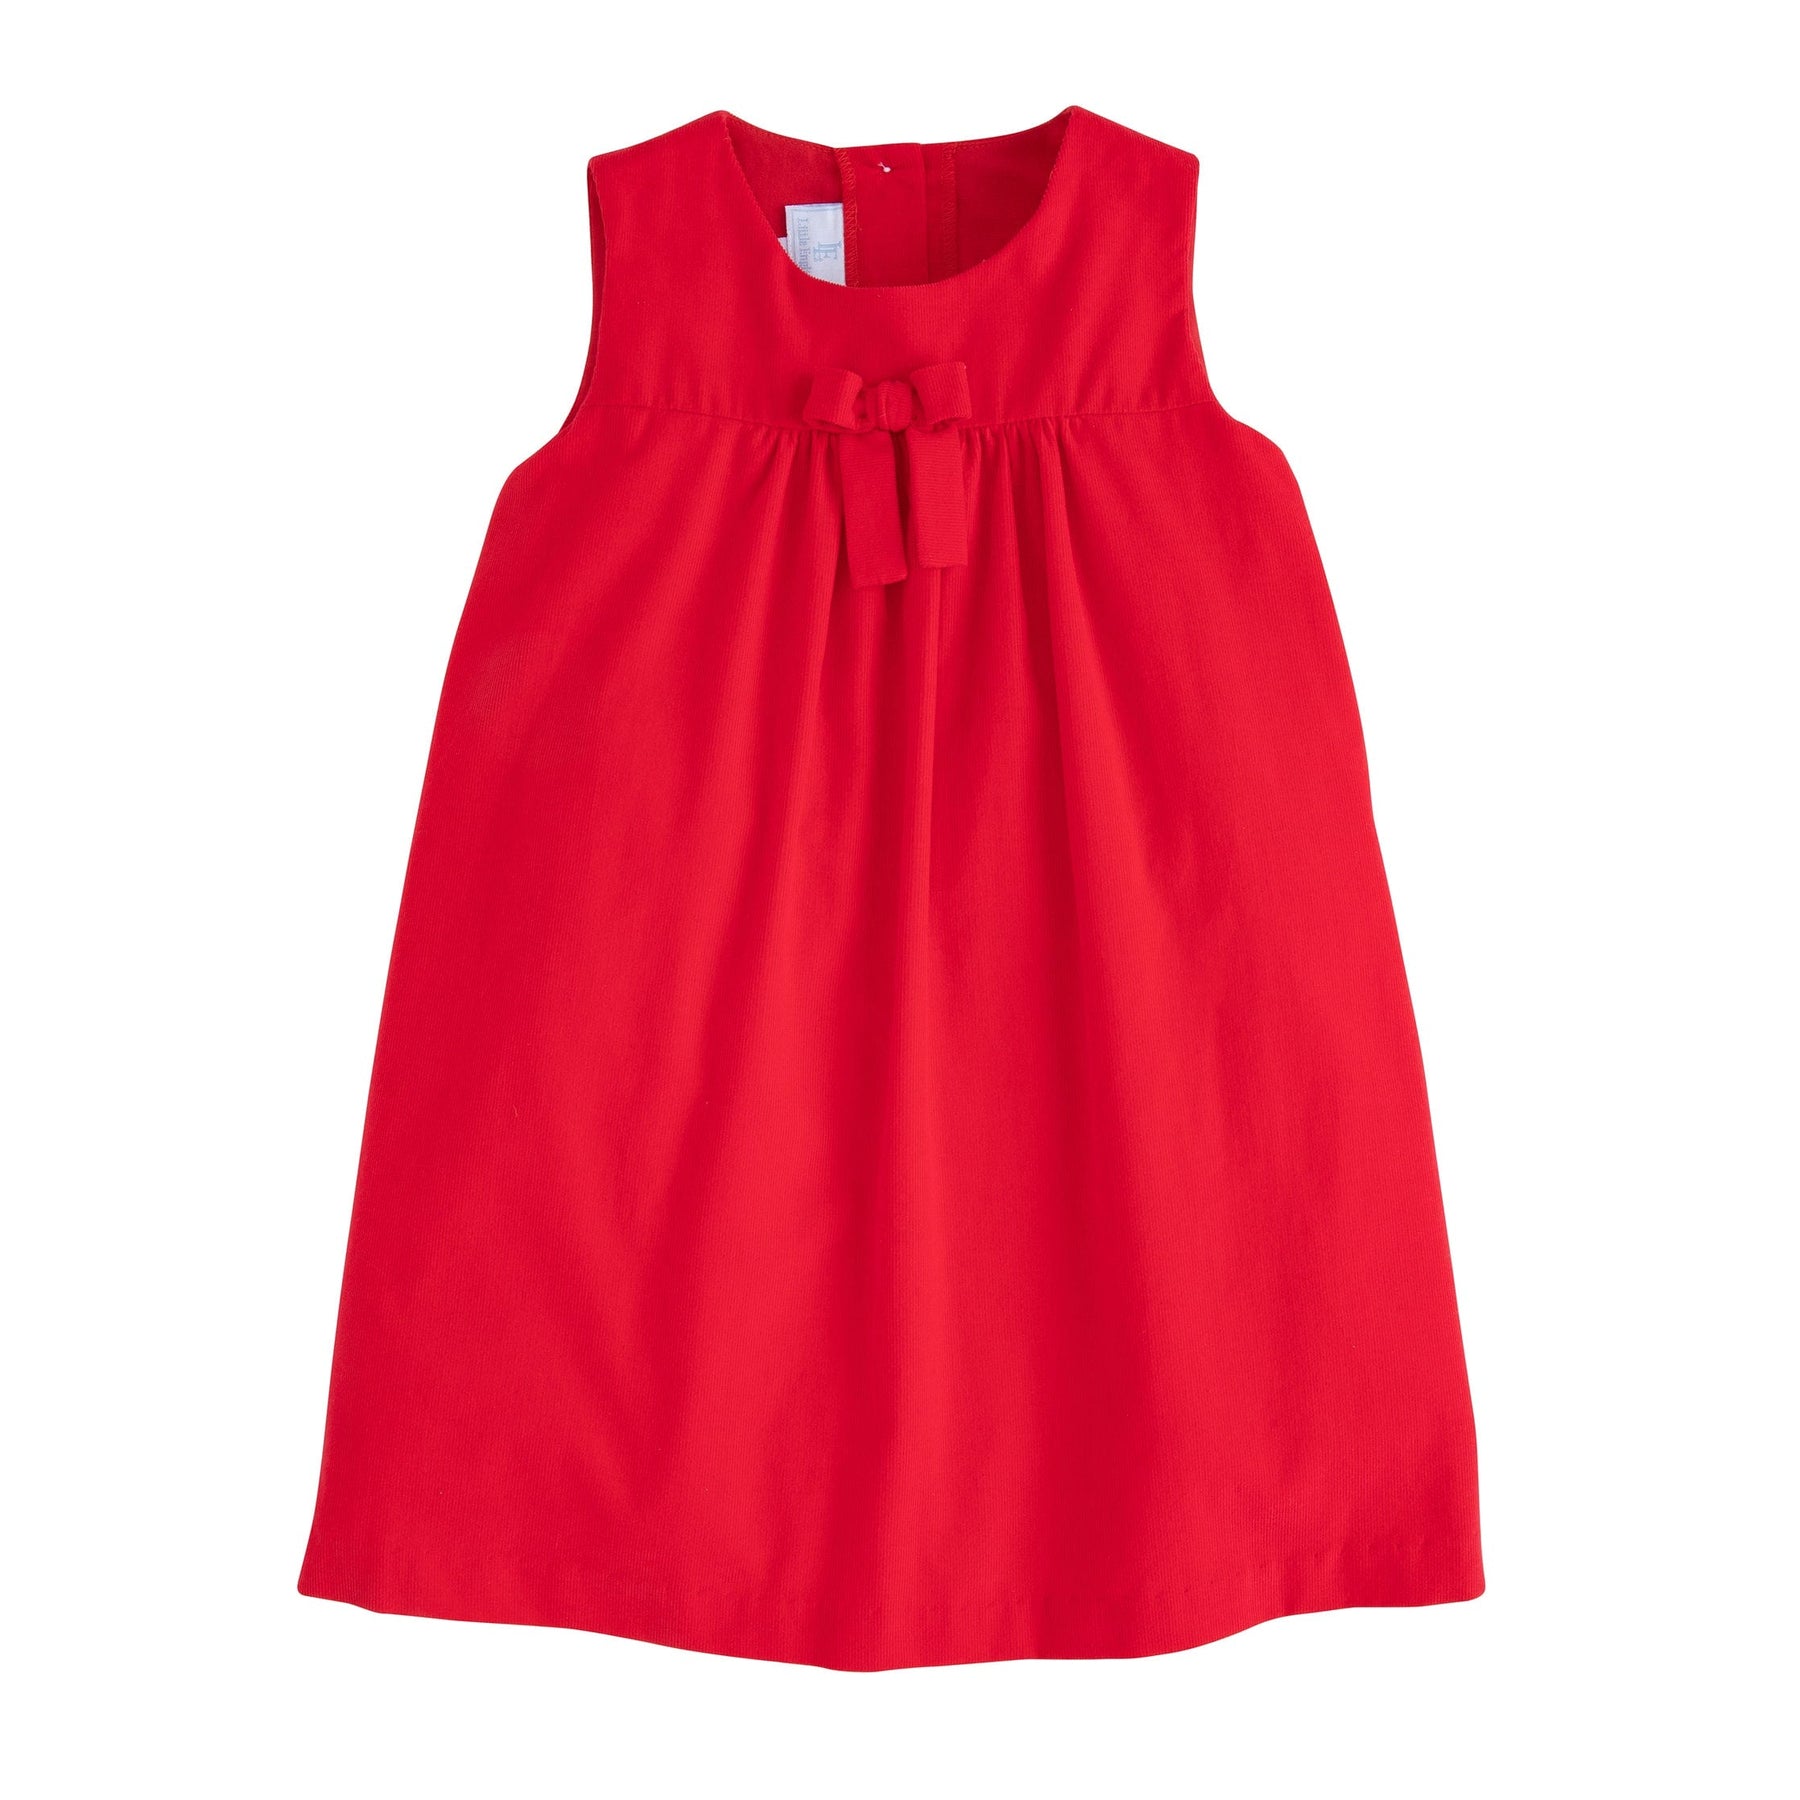 seguridadindustrialcr classic childrens clothing girls sleeveless red pleated jumper with a red bow on chest